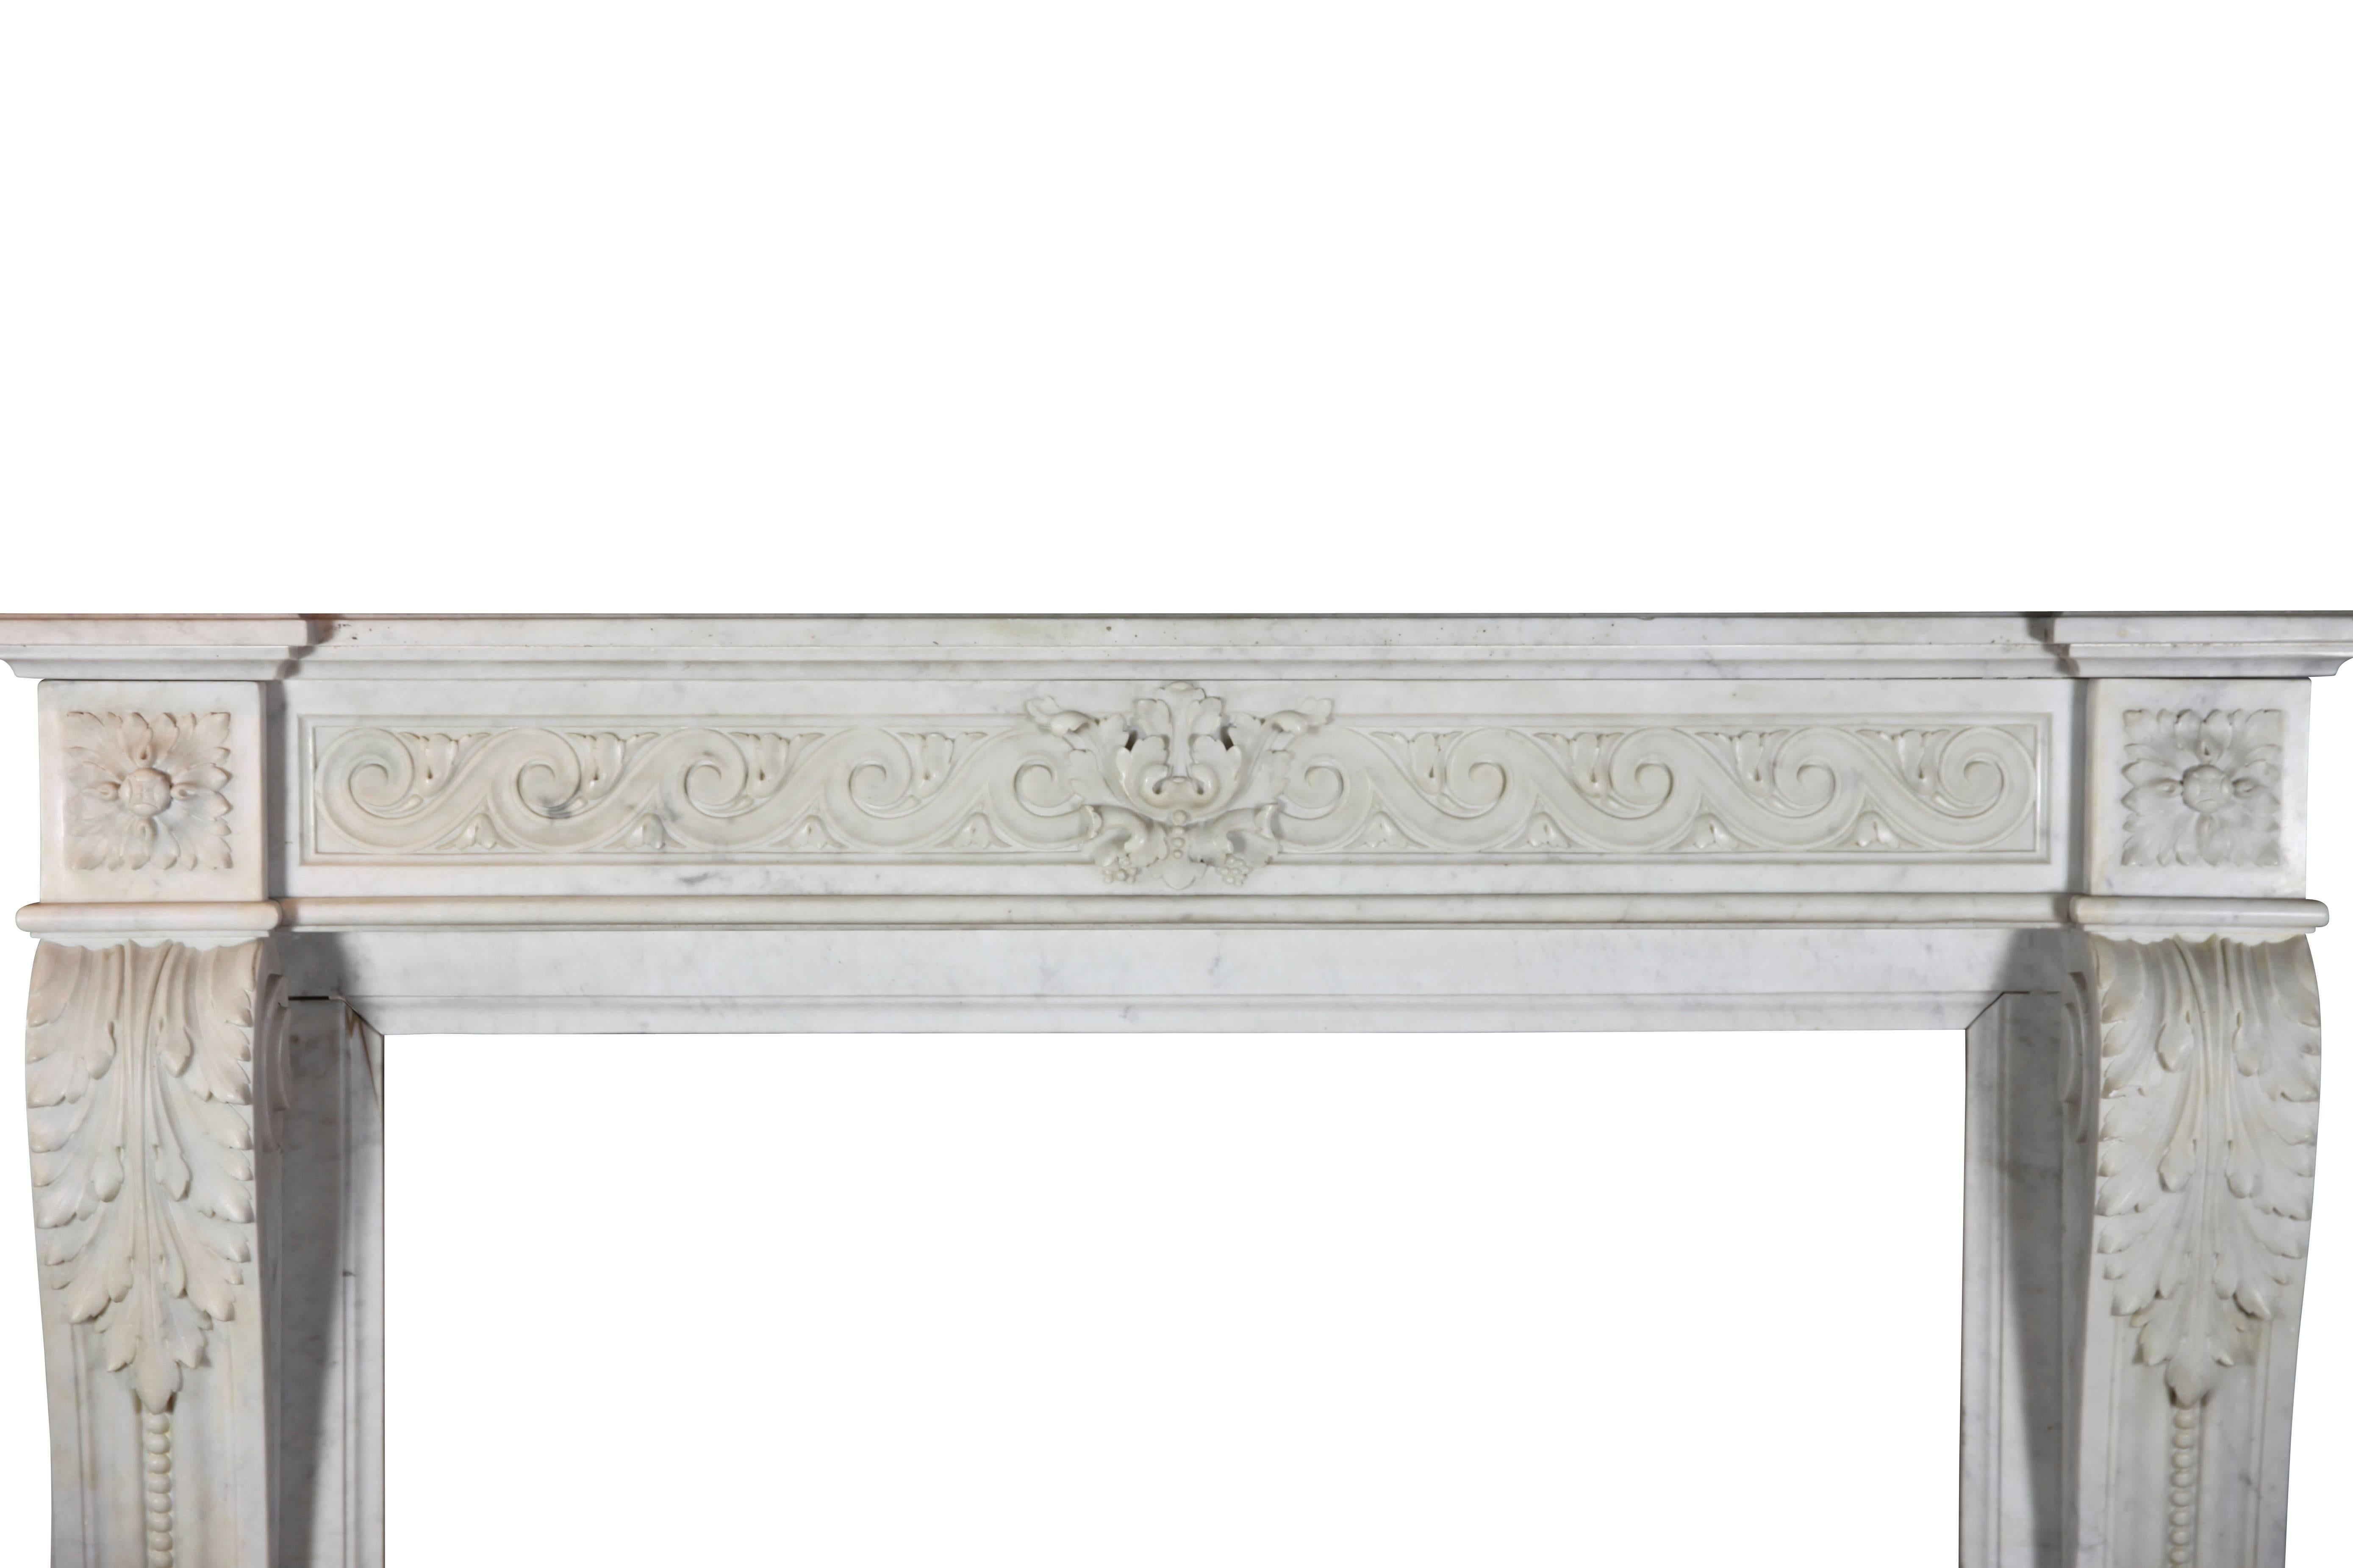 This is a quite small antique fireplace mantle in Carrara marble for a classic, modernistic interior design with lots of light coming into the room.
Very fine and original carving. Works too in a French apartment style decoration.
Measures:
136